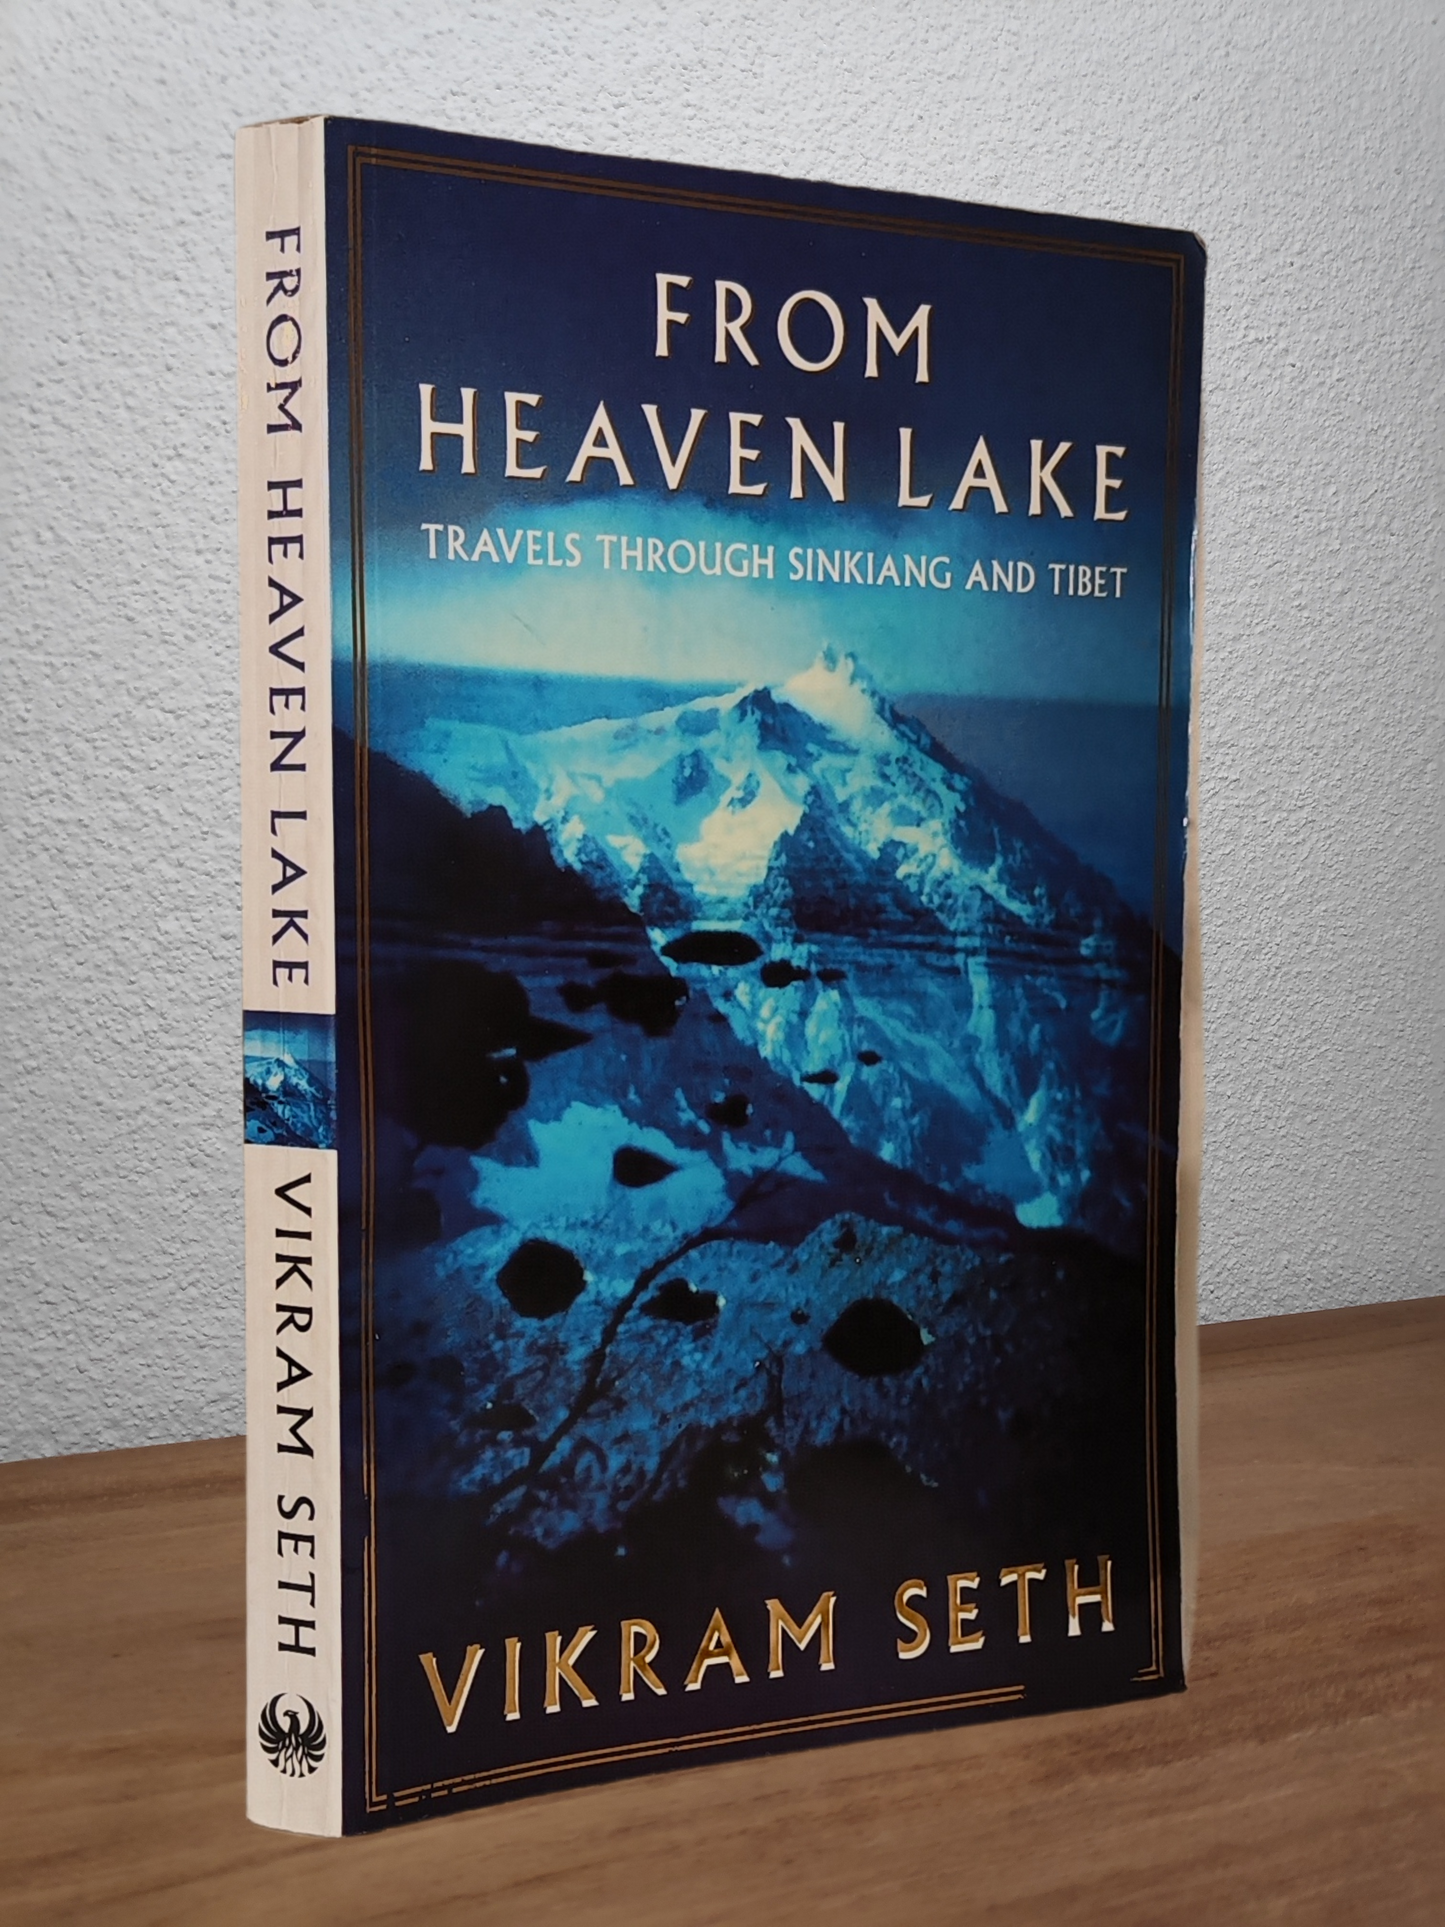 Vikram Seth - From Heaven Lake   - Second-hand english book to deliver in Zurich & Switzerland